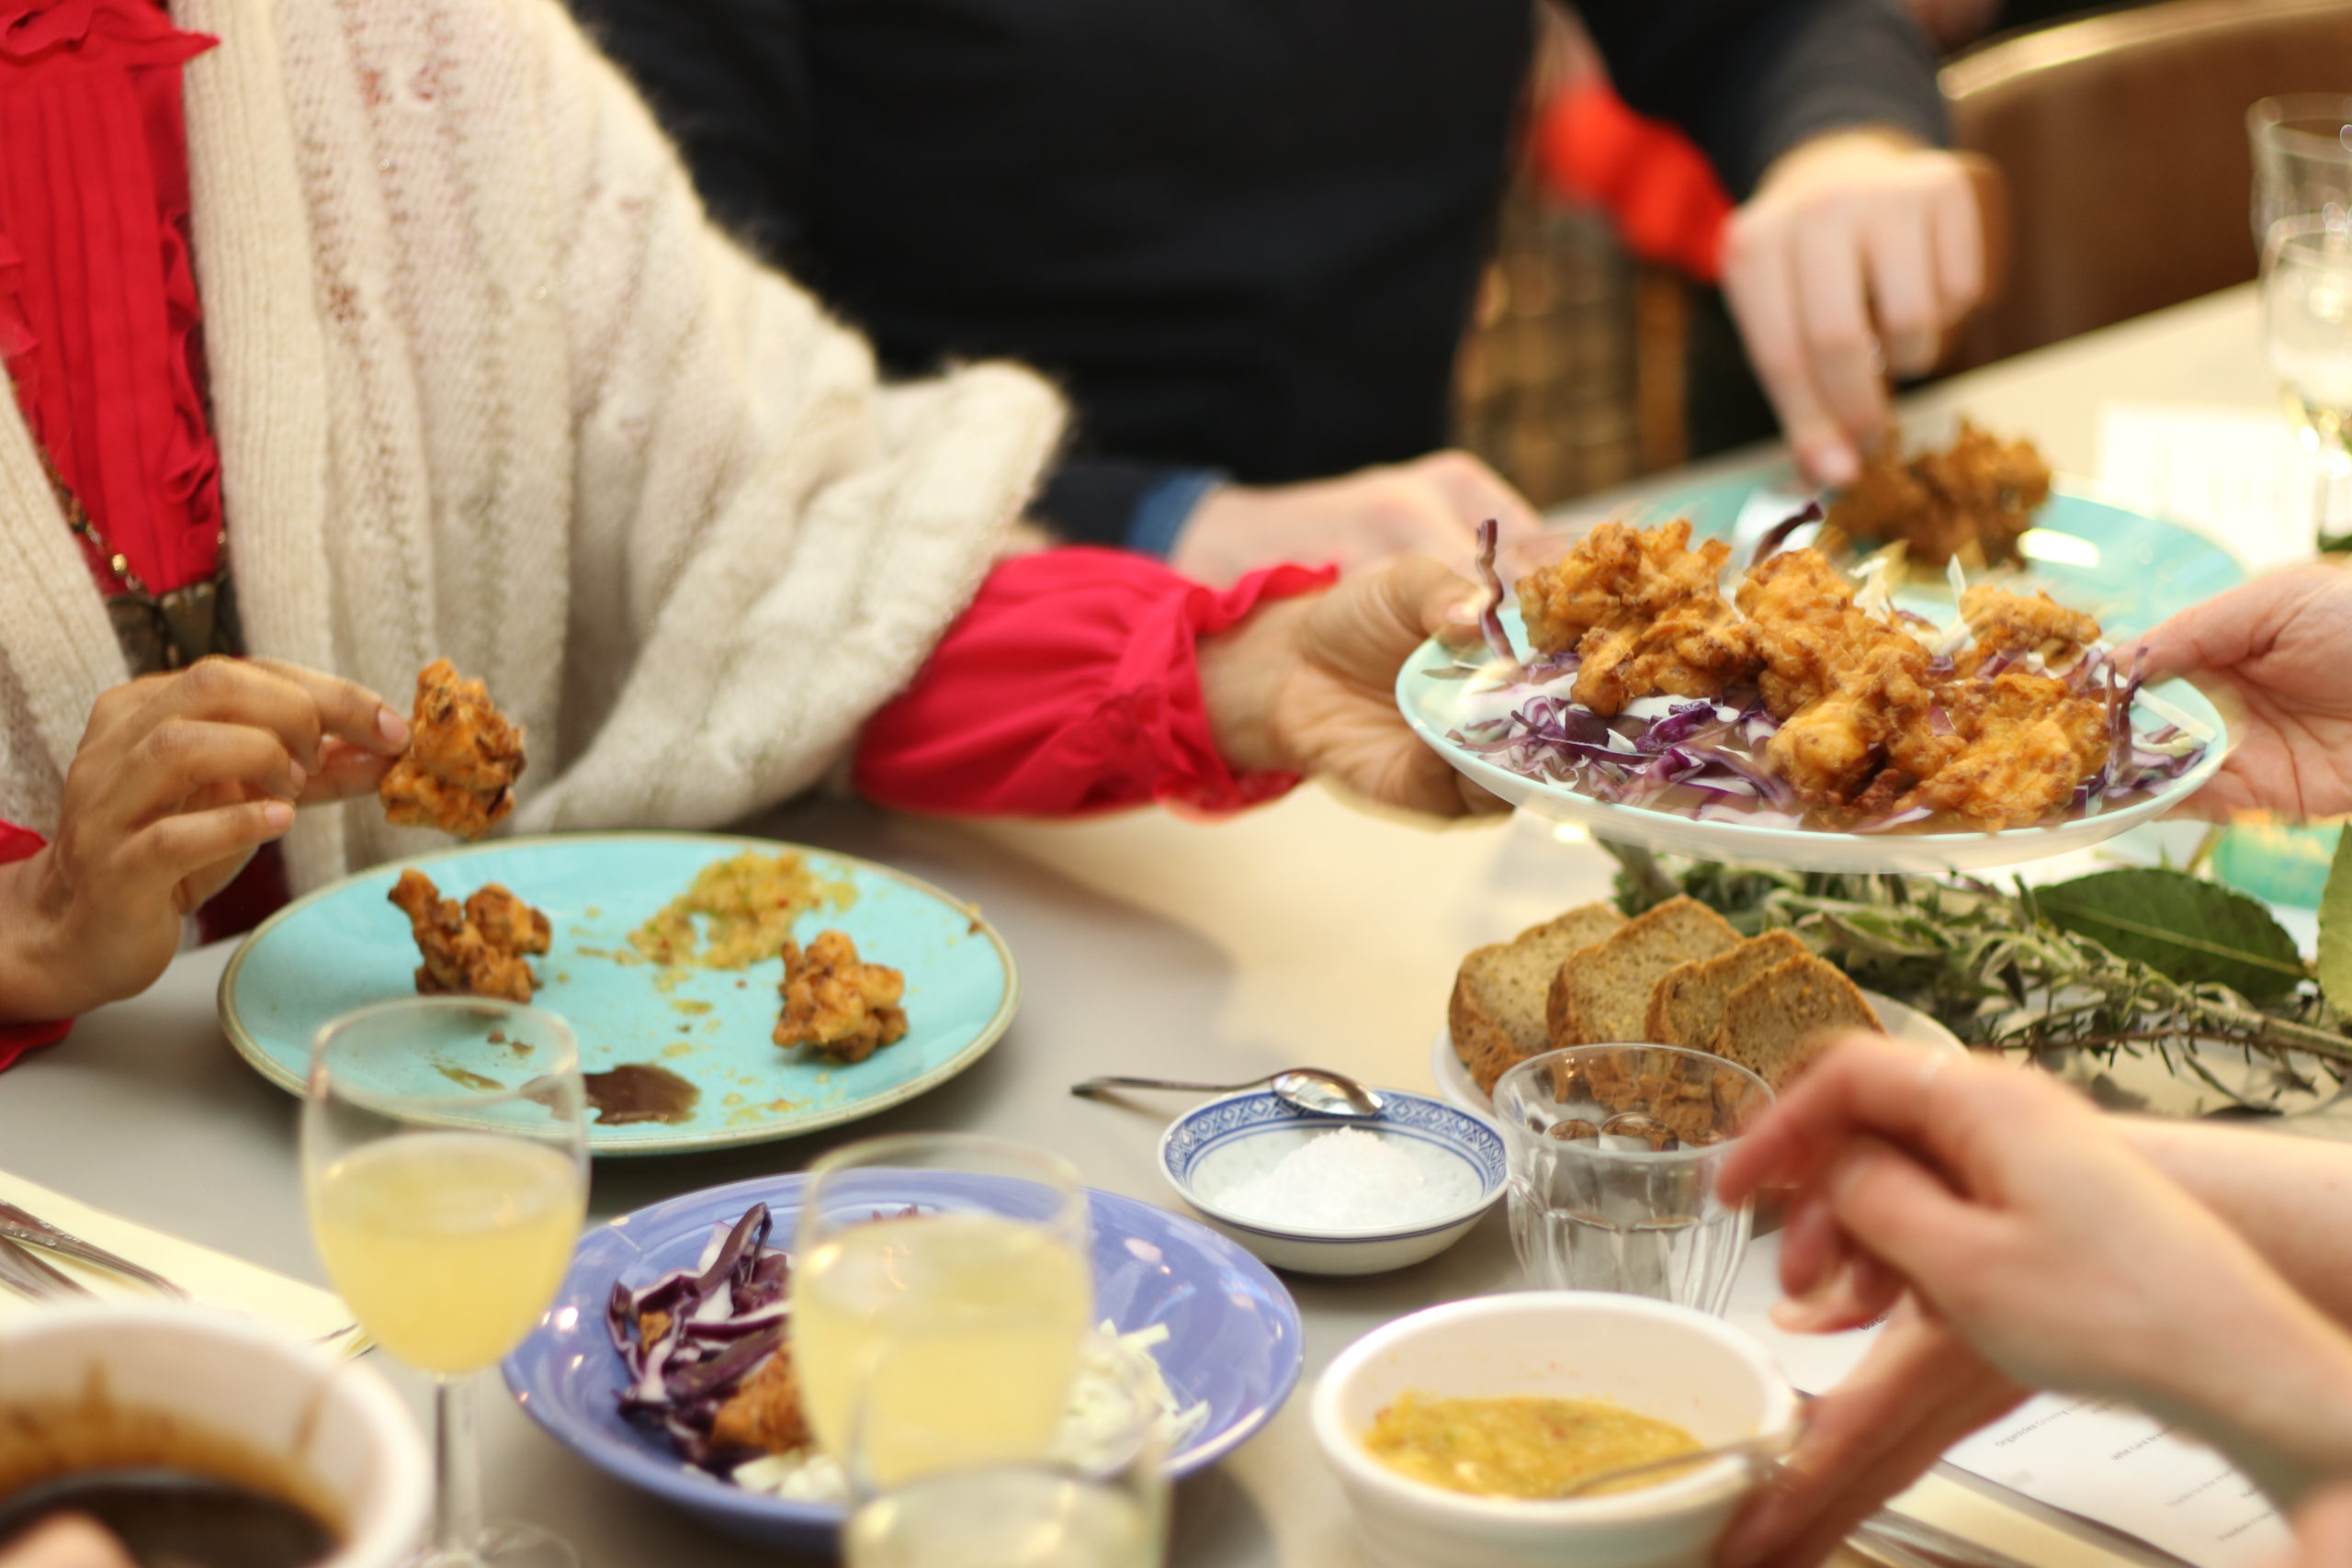 The Taste of Home: A Community Feast